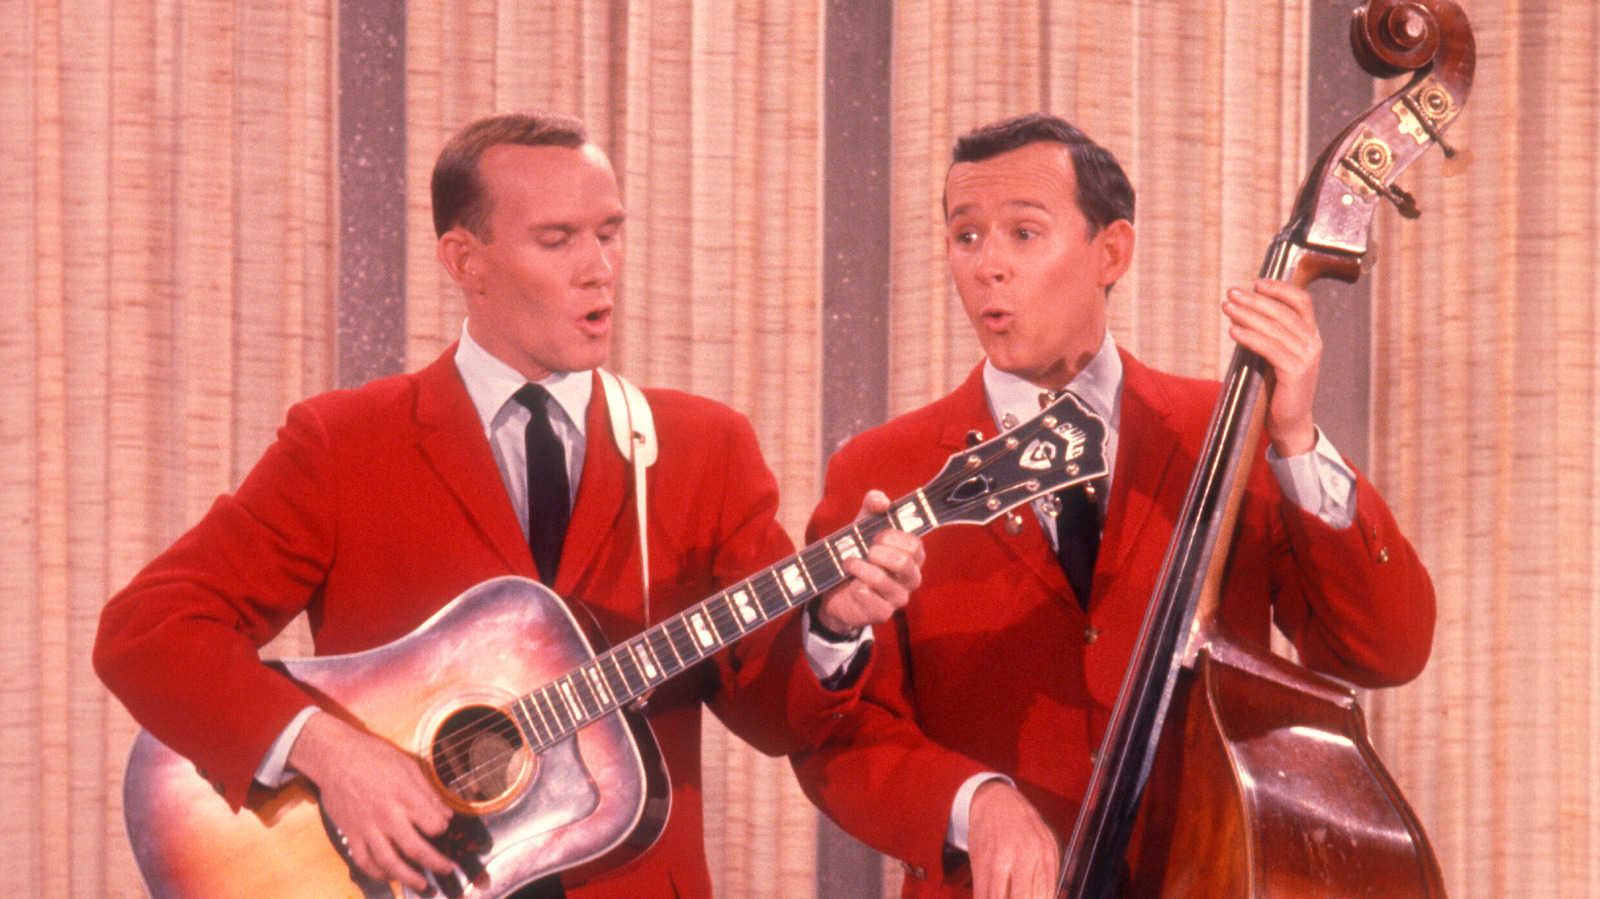 The Smothers Brothers Show Wasn't 'Canceled,' They Were Fired That's